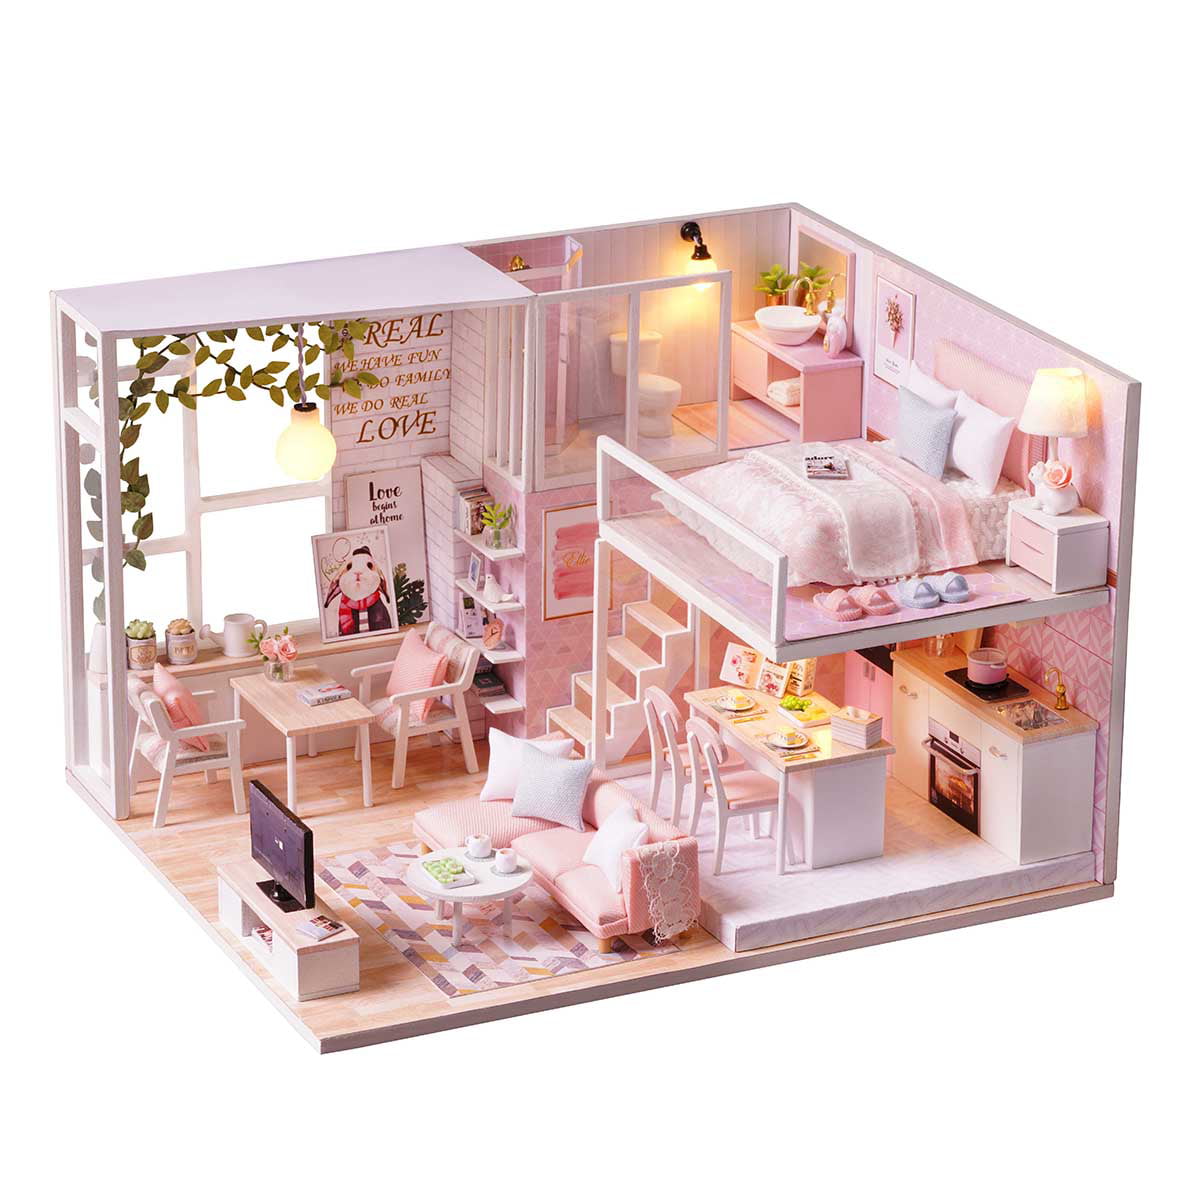 Modern Miniature Doll House 3D Wooden Dollhouse With Pool Furniture For Girls 